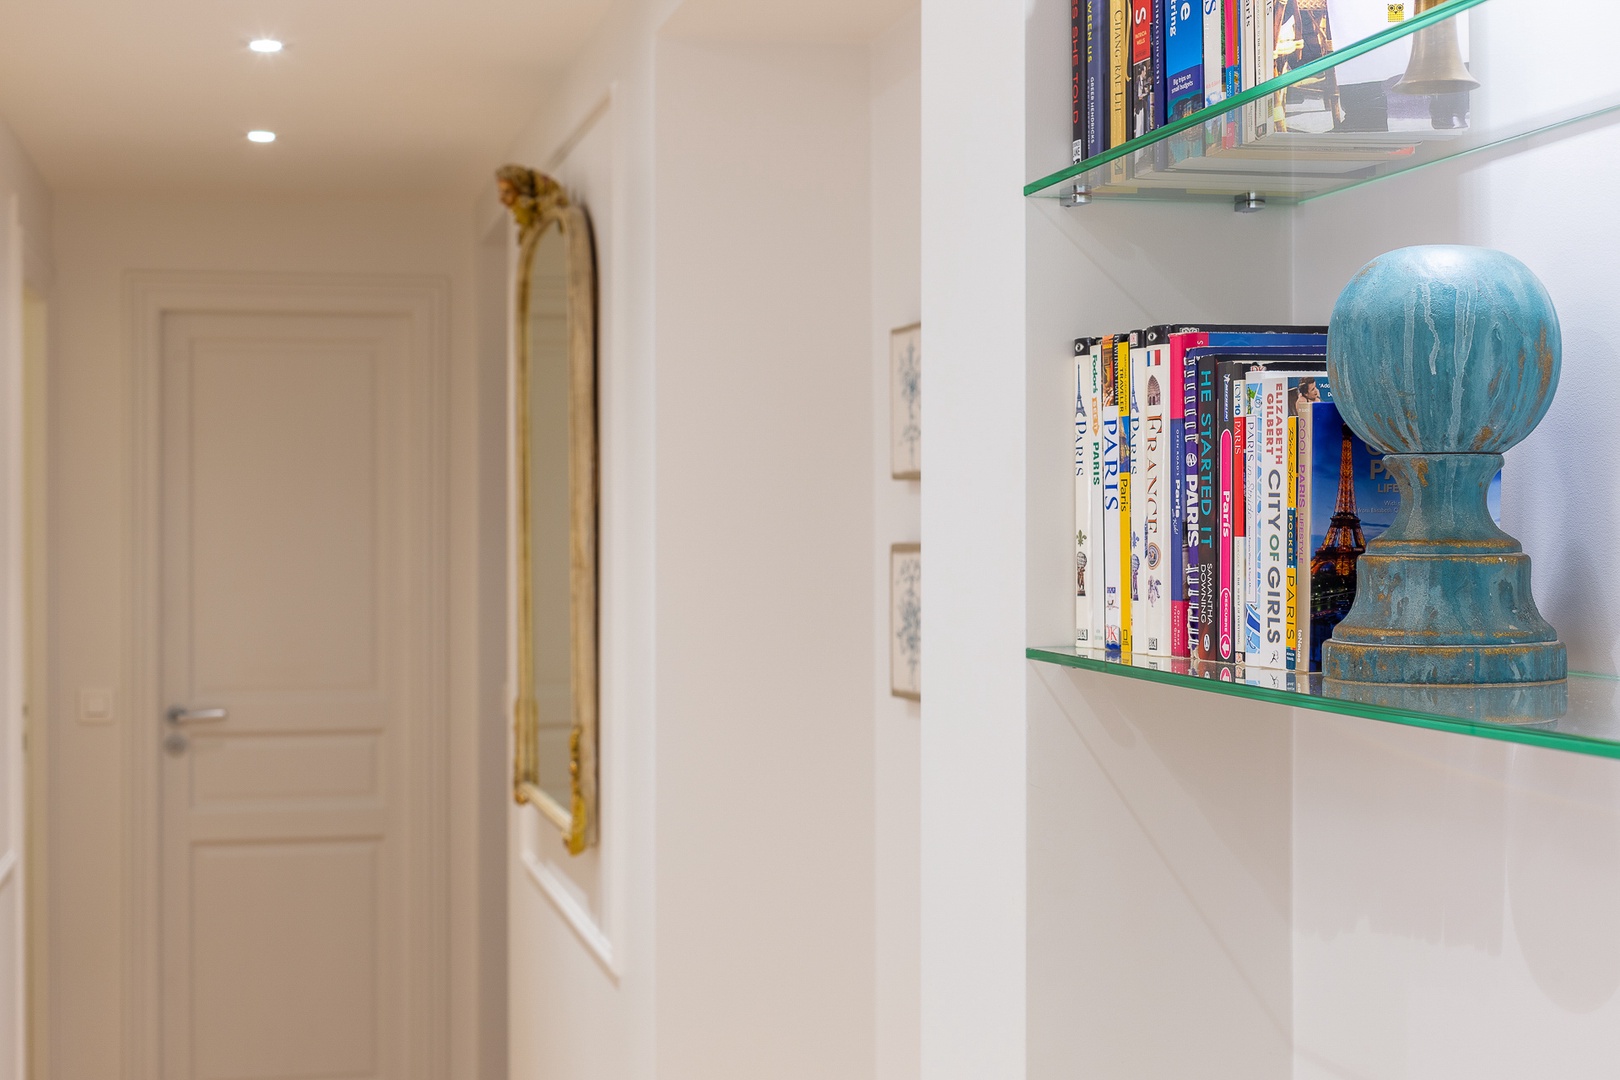 Enjoy the hallway library and use it to plan your Paris stay!